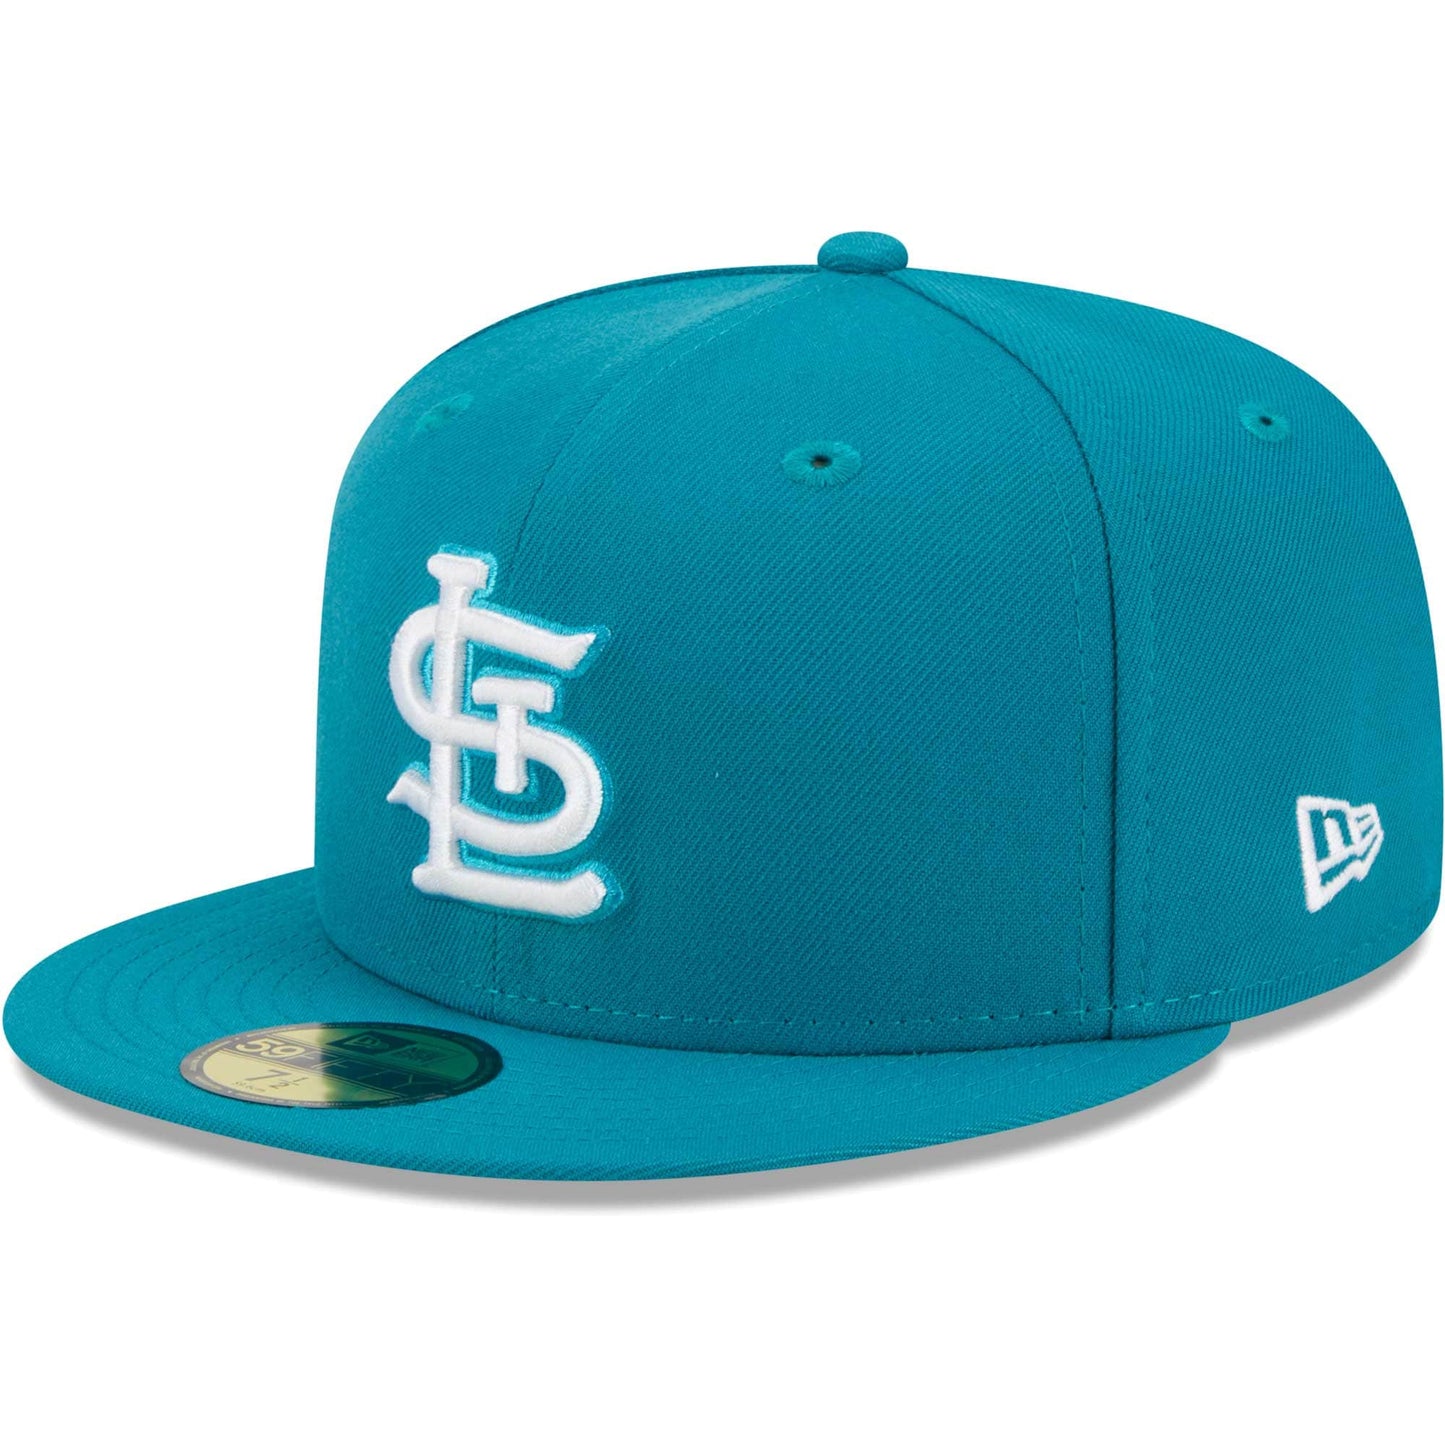 St. Louis Cardinals New Era 59FIFTY Fitted Hat - Turquoise